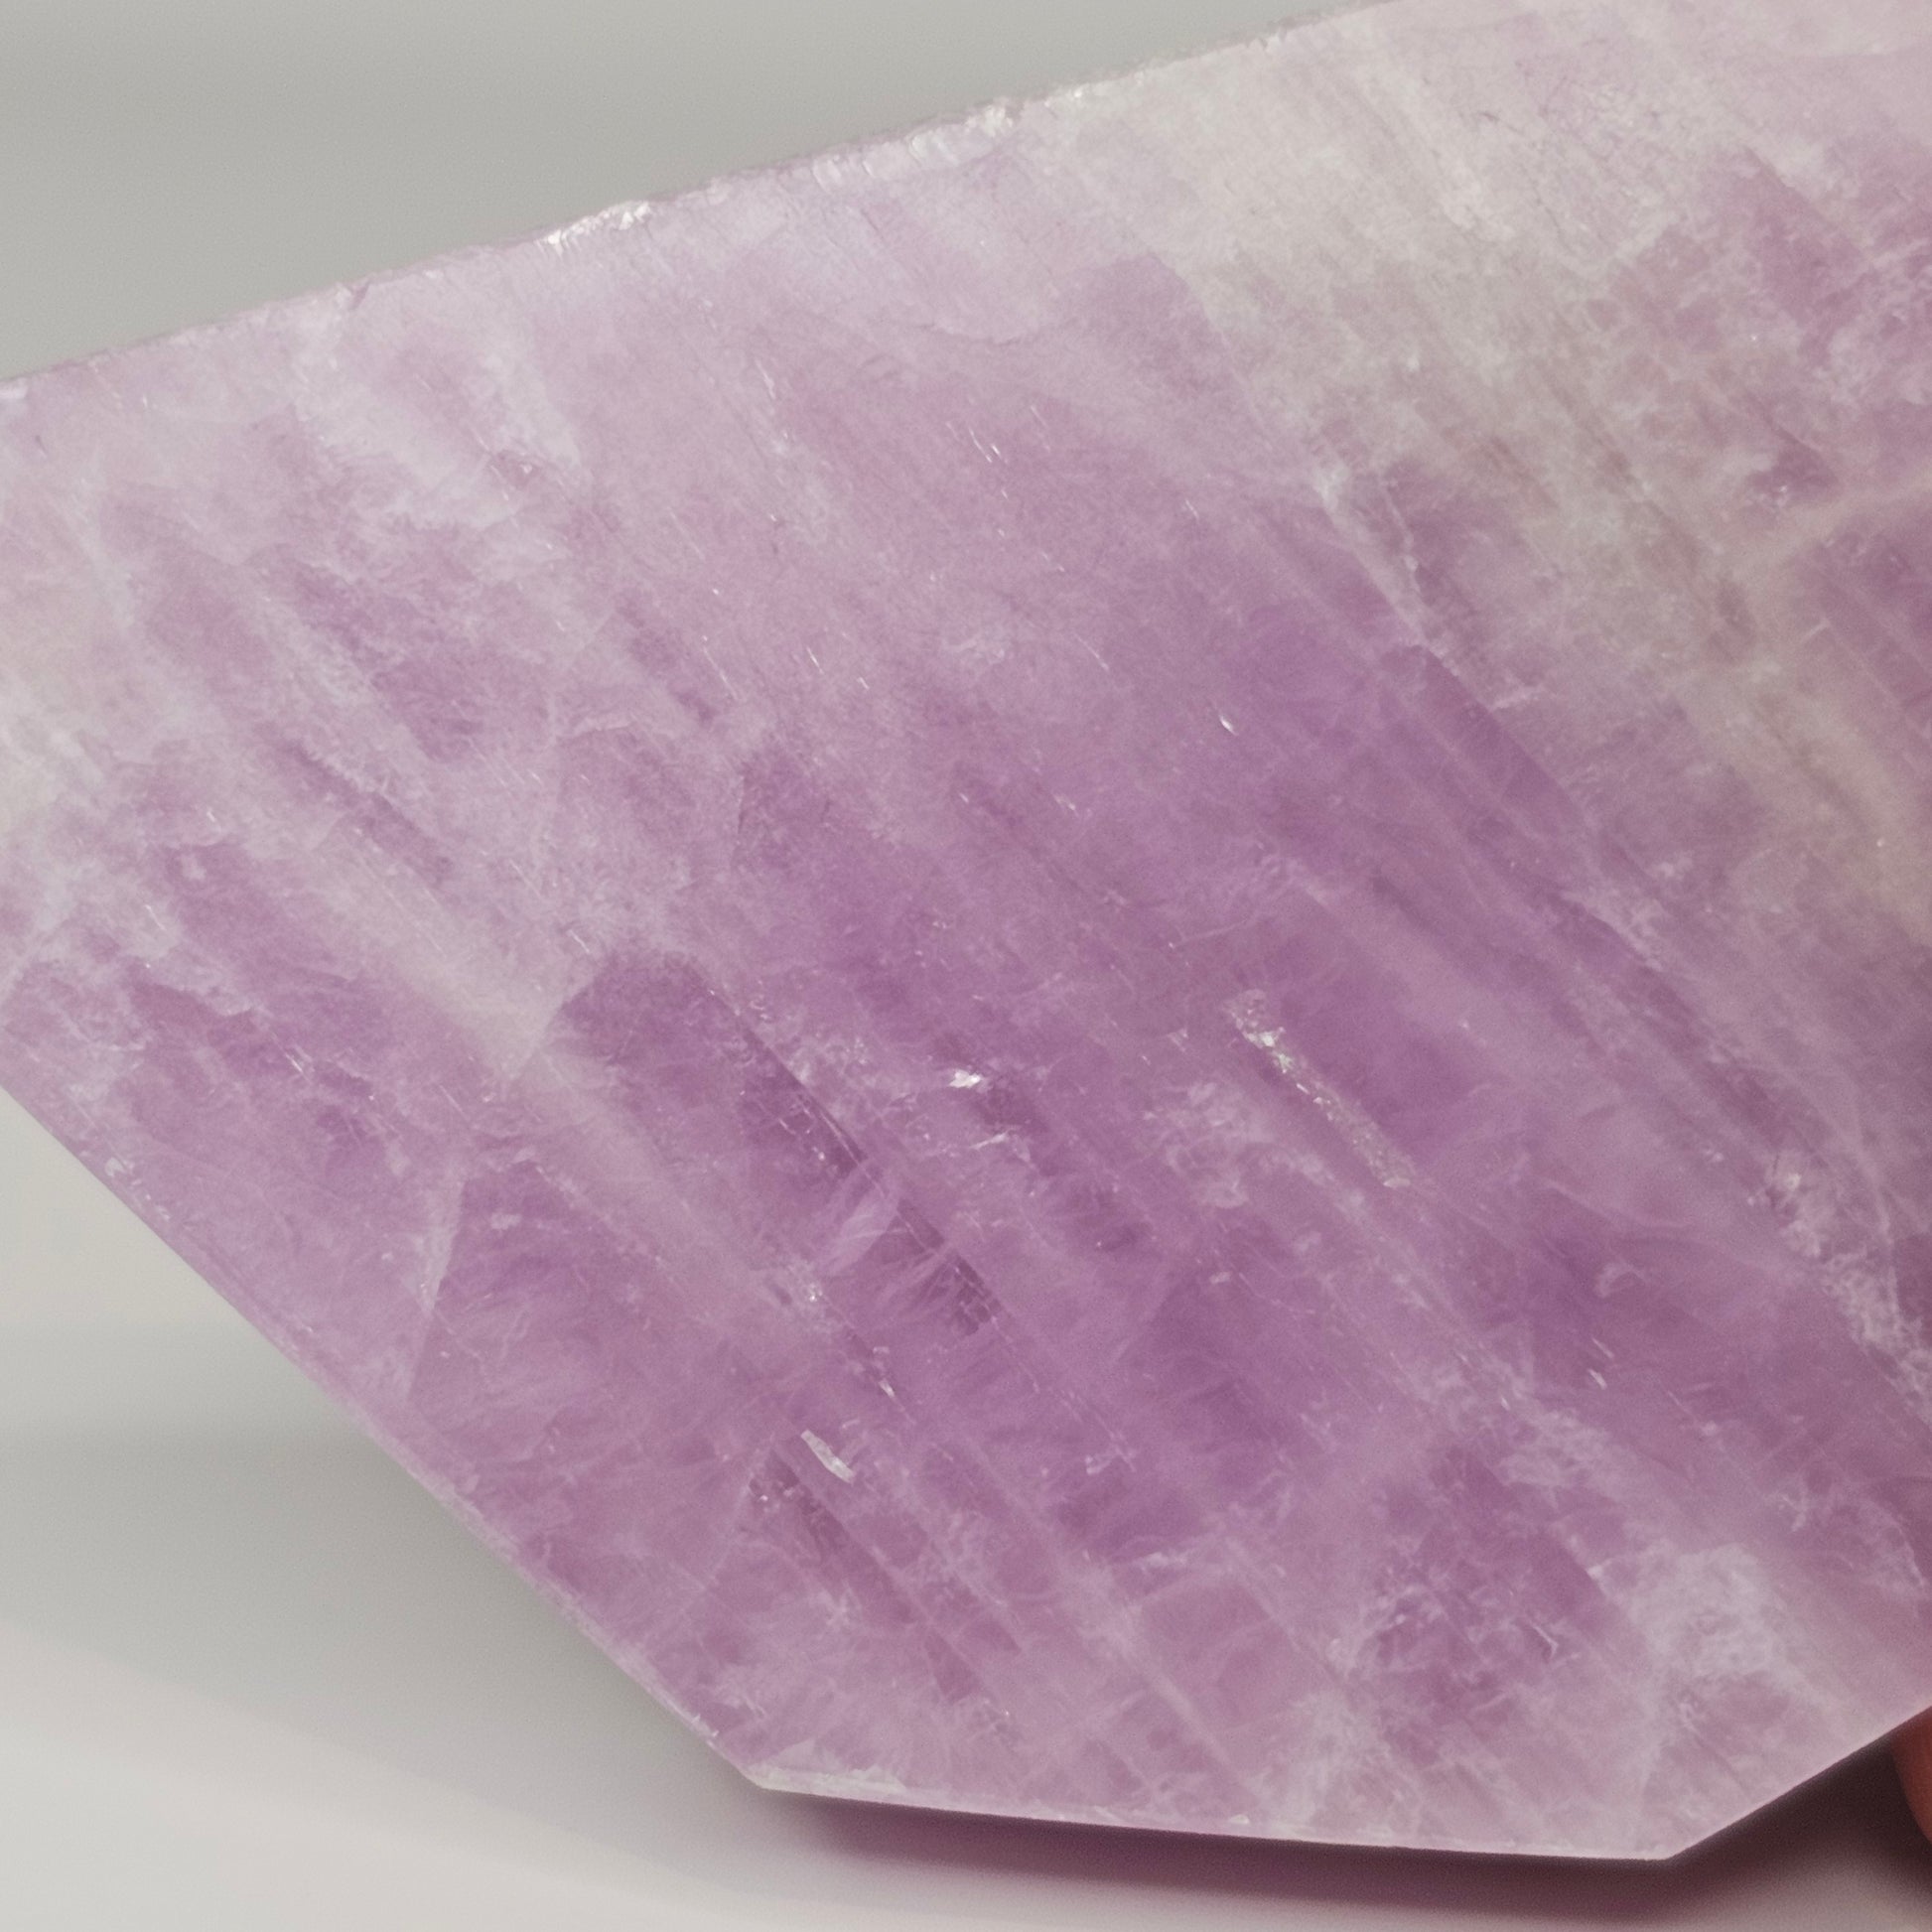 Gorgeous Kunzite slab from Afghanistan. Self-standing on all sides.